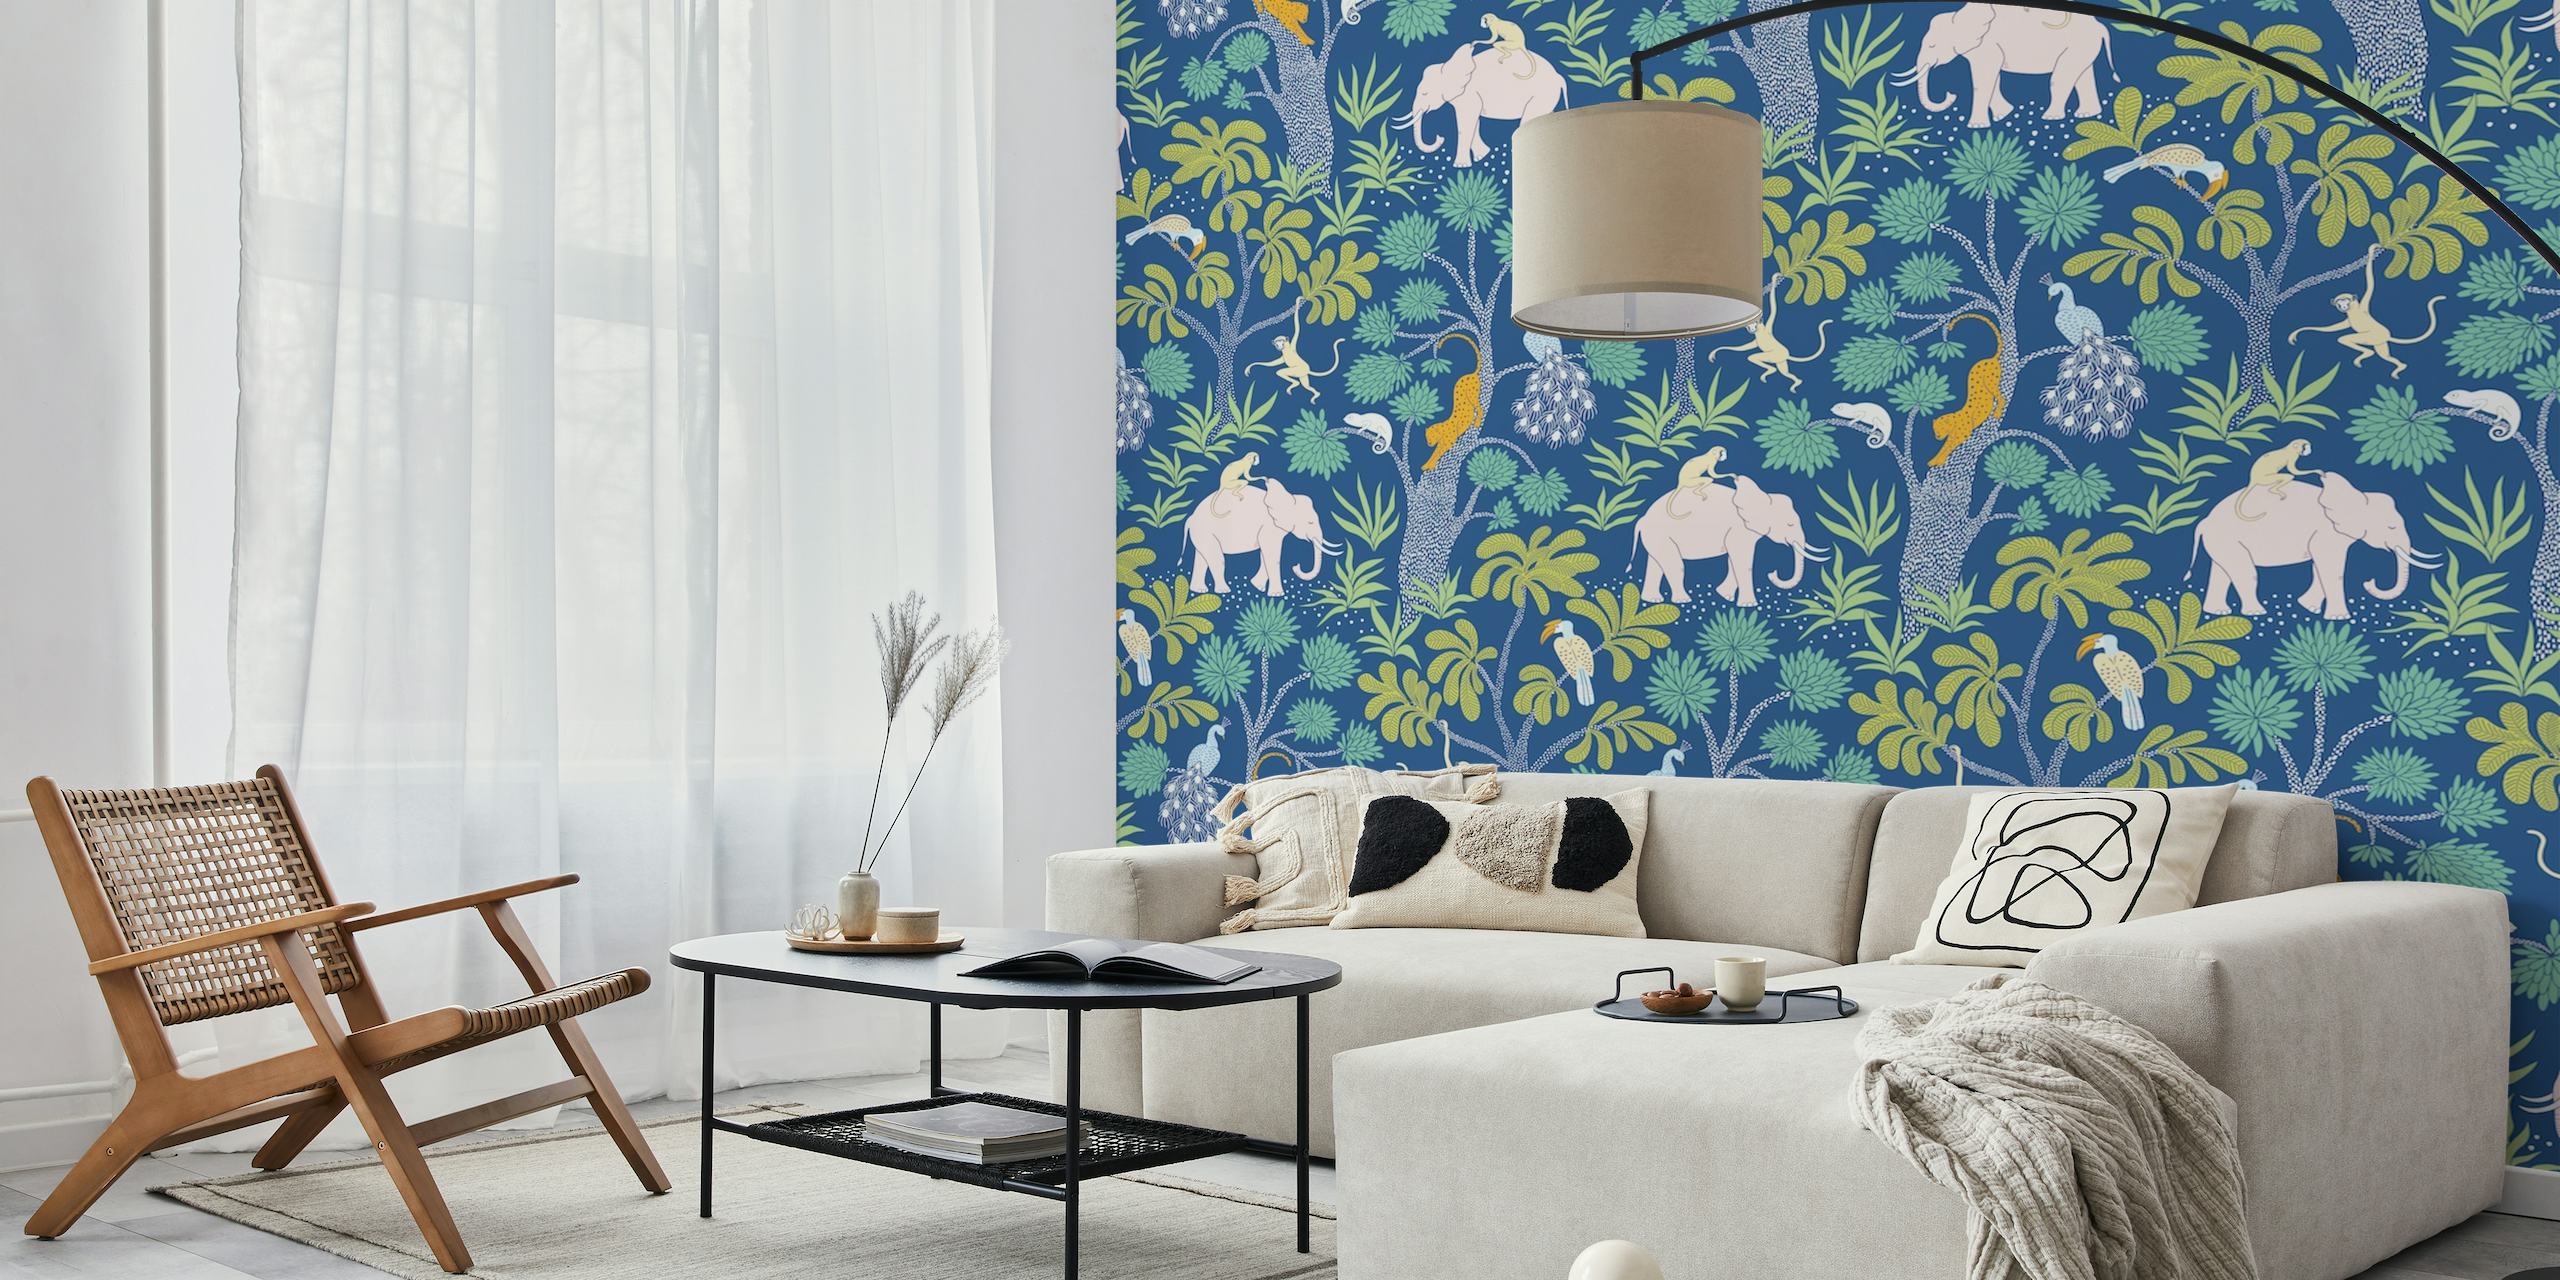 Colorful elephant jungle pattern wall mural from Happywall